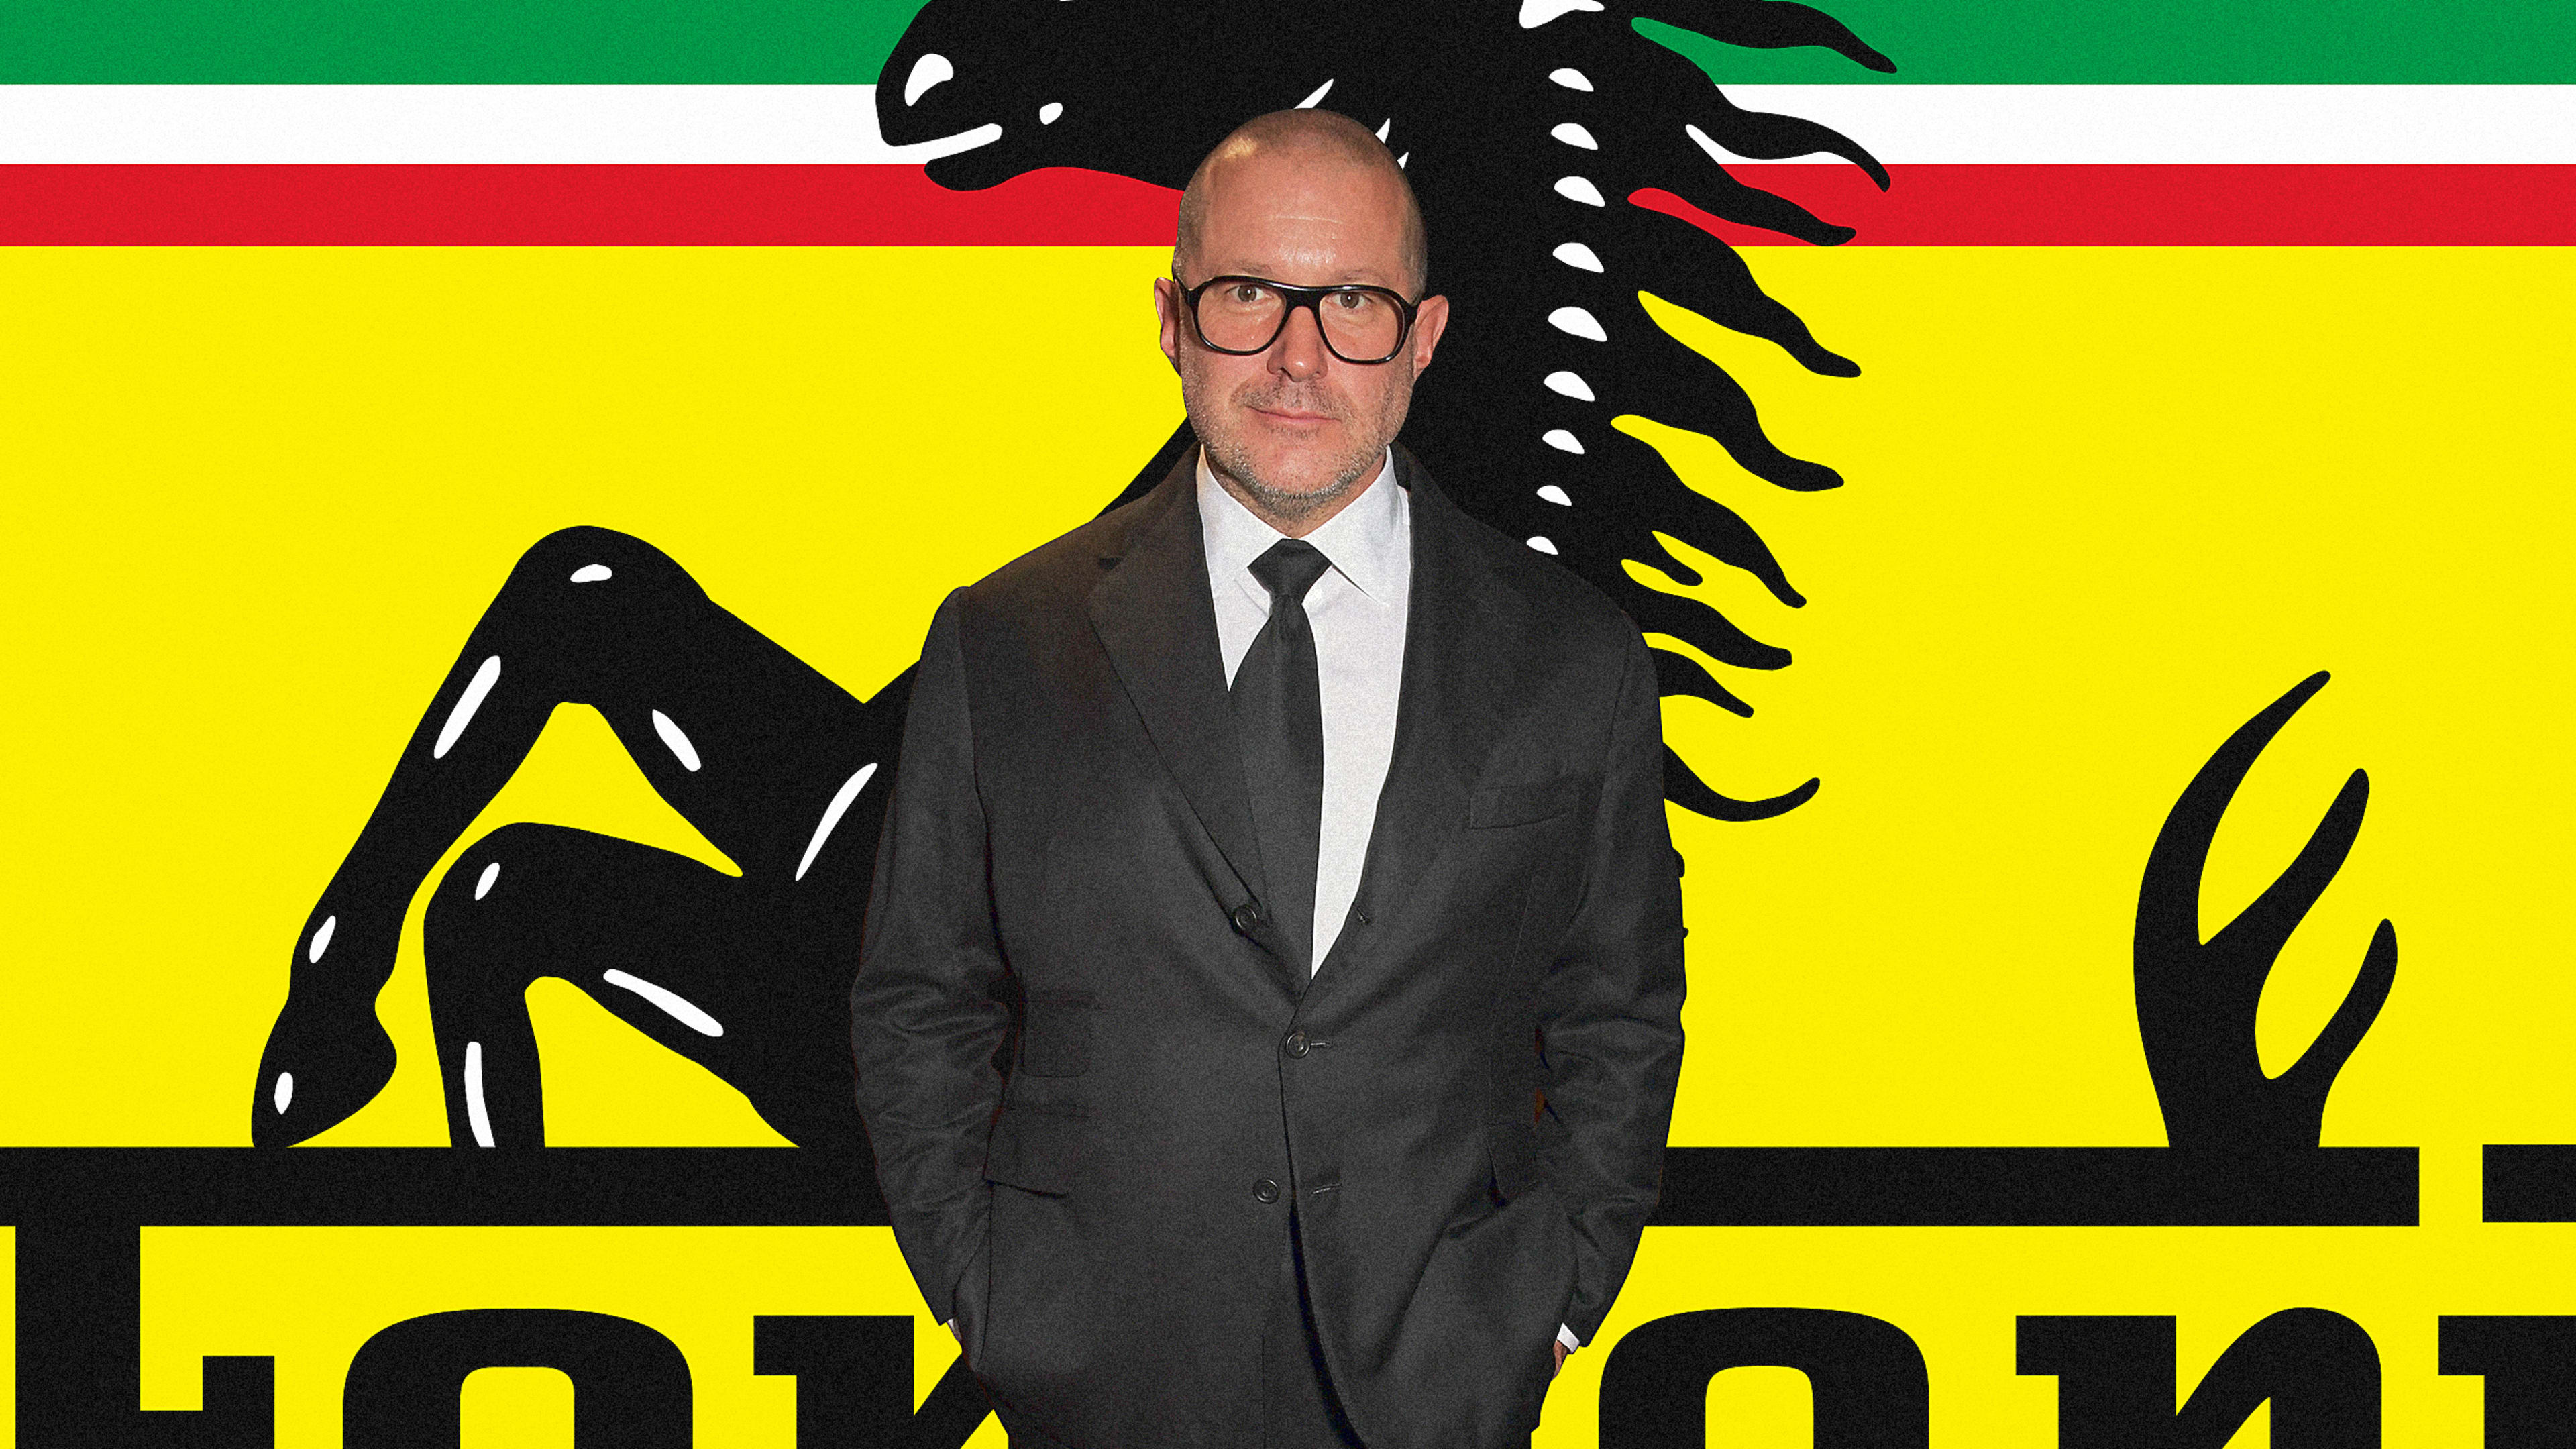 Ferrari to partner with Jony Ive’s new design firm on its first electric car